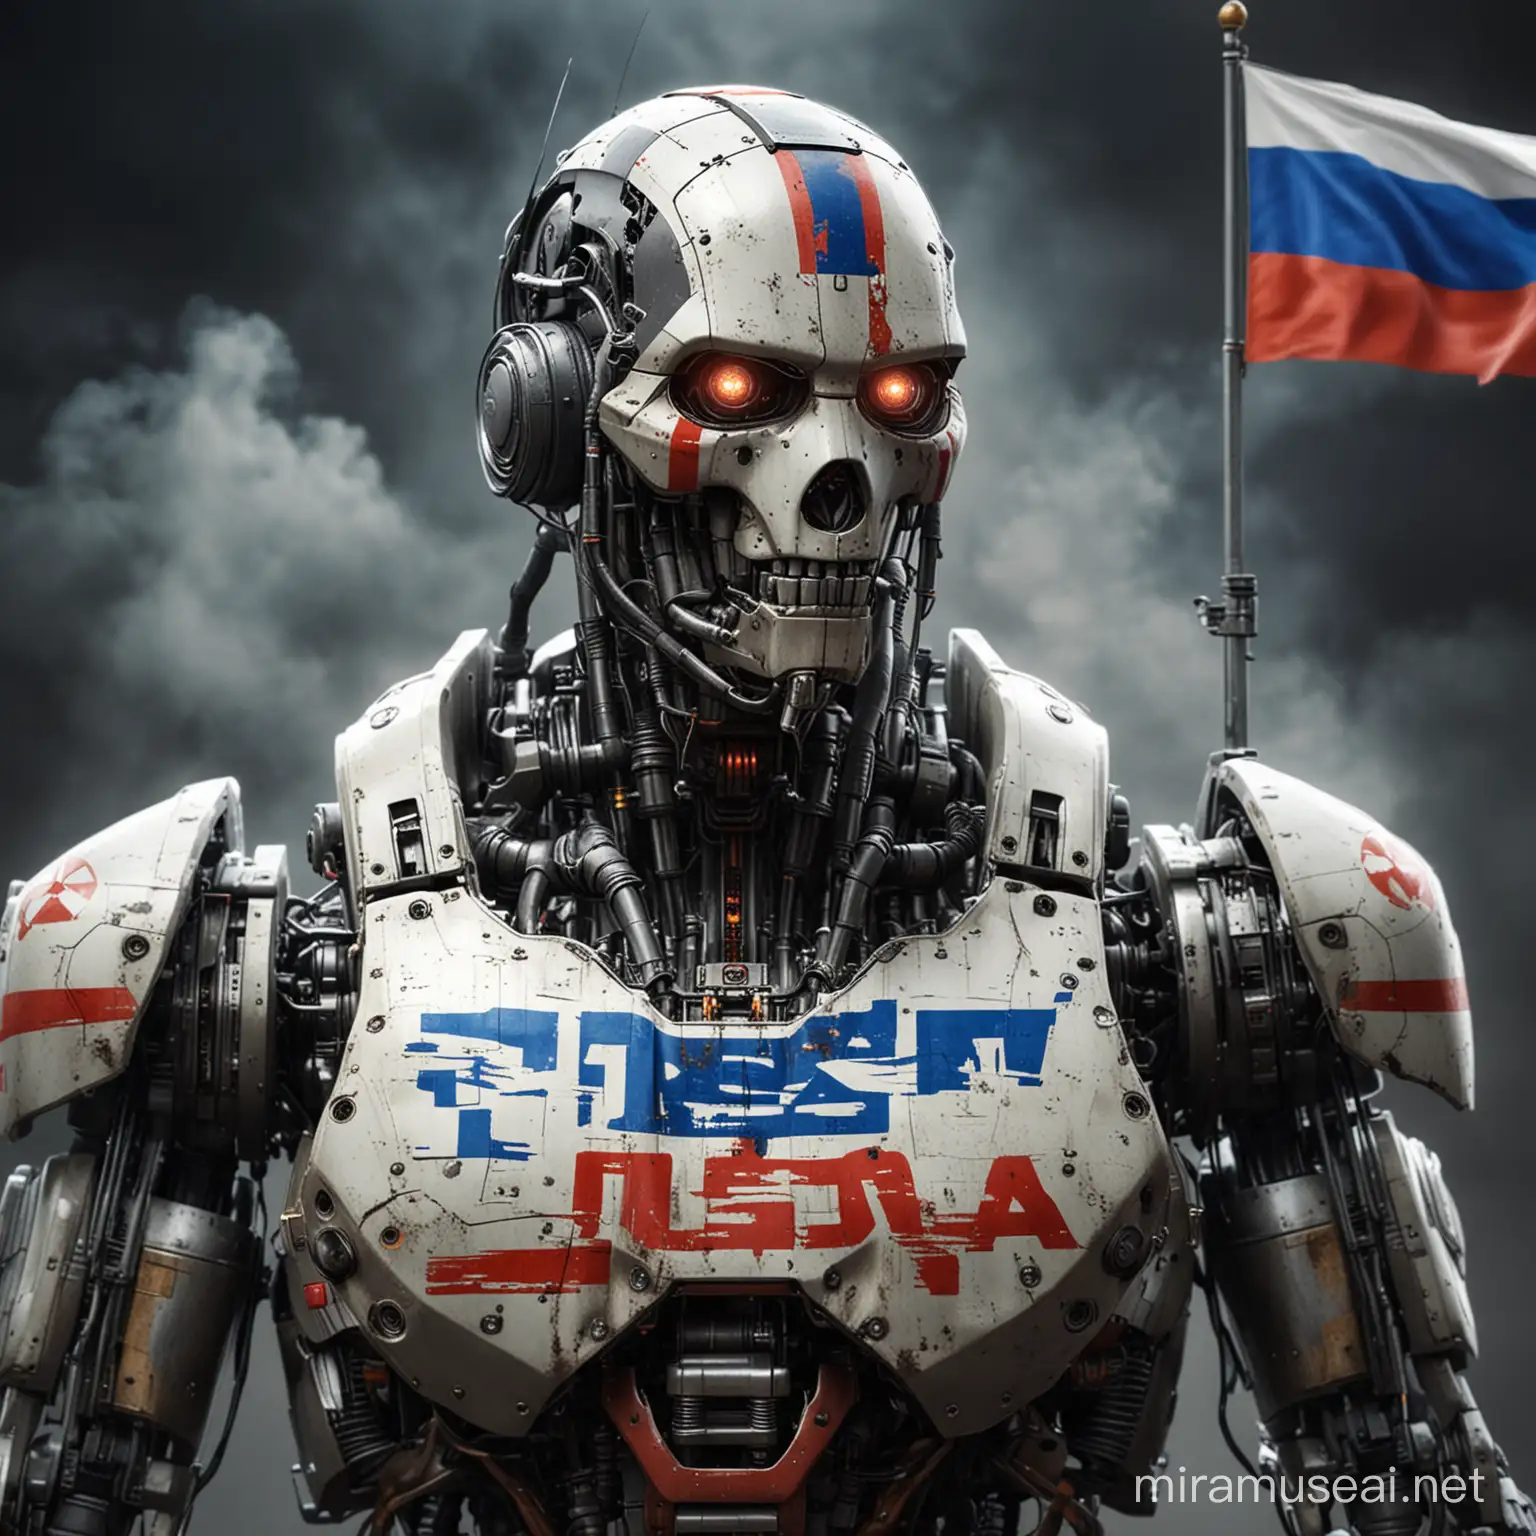  Russia as a robot,make it serious,dangerous and like russian,great atmosphere,realistic,with big rockets and add russian flag to robot